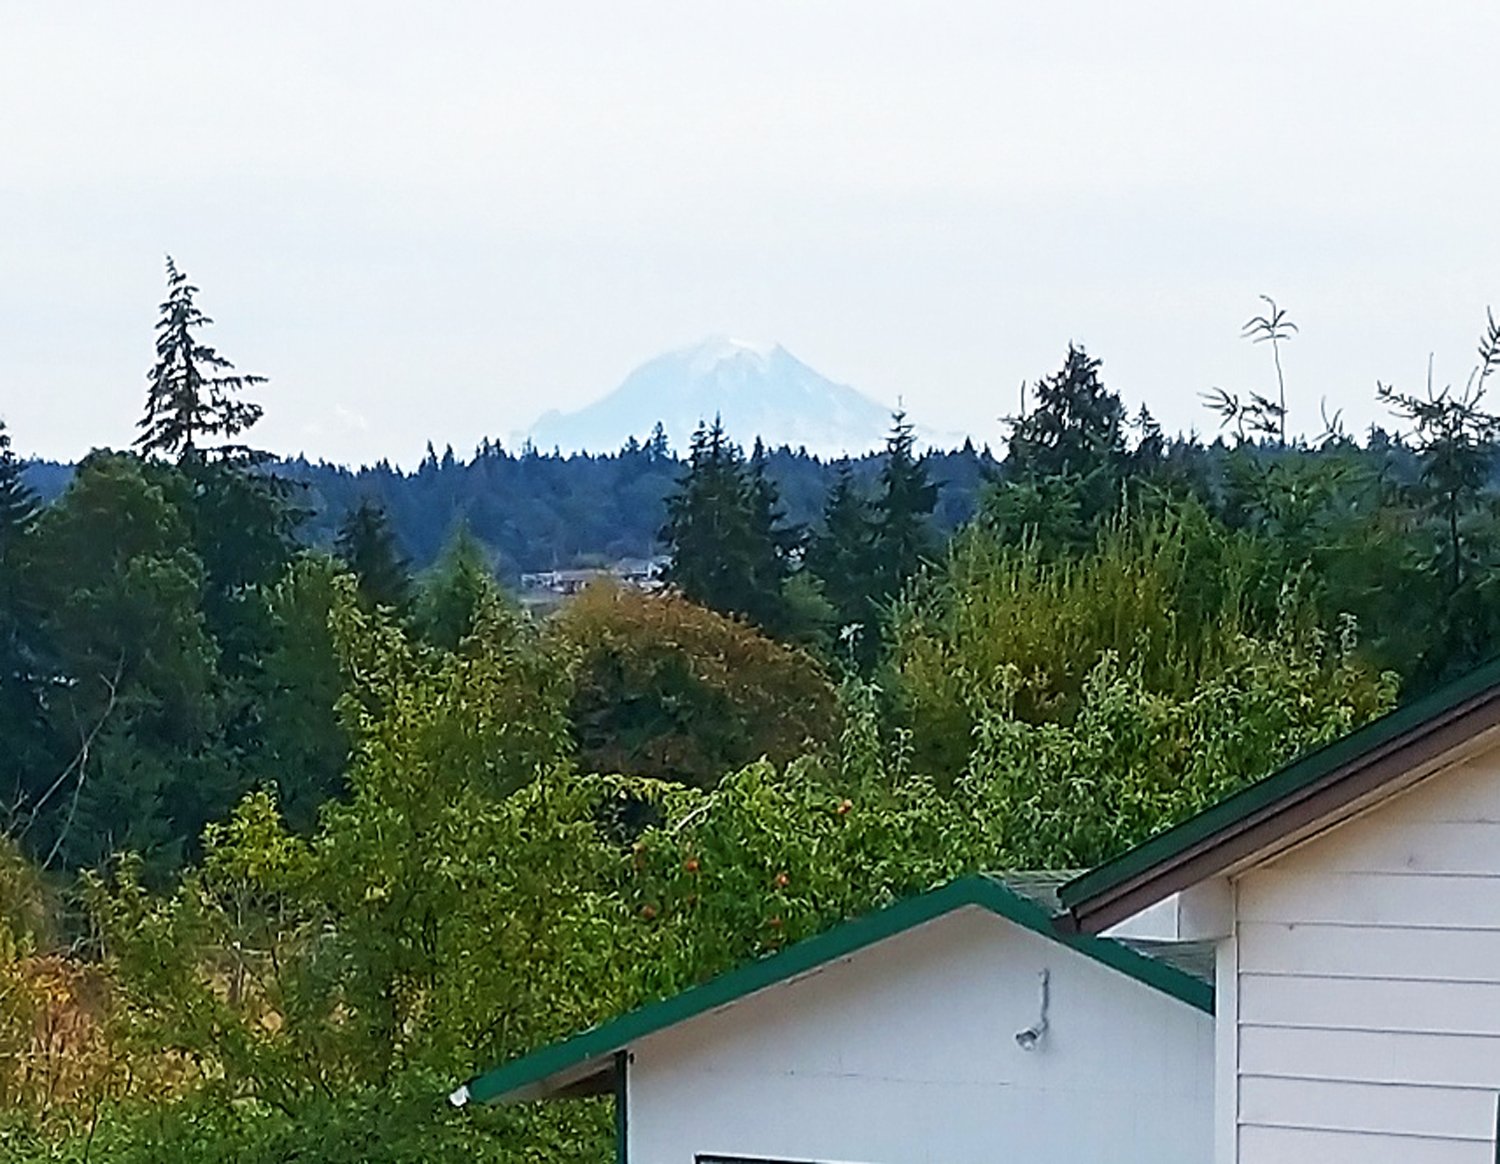 Mount Baker ( I think ) poking out in the distance. 